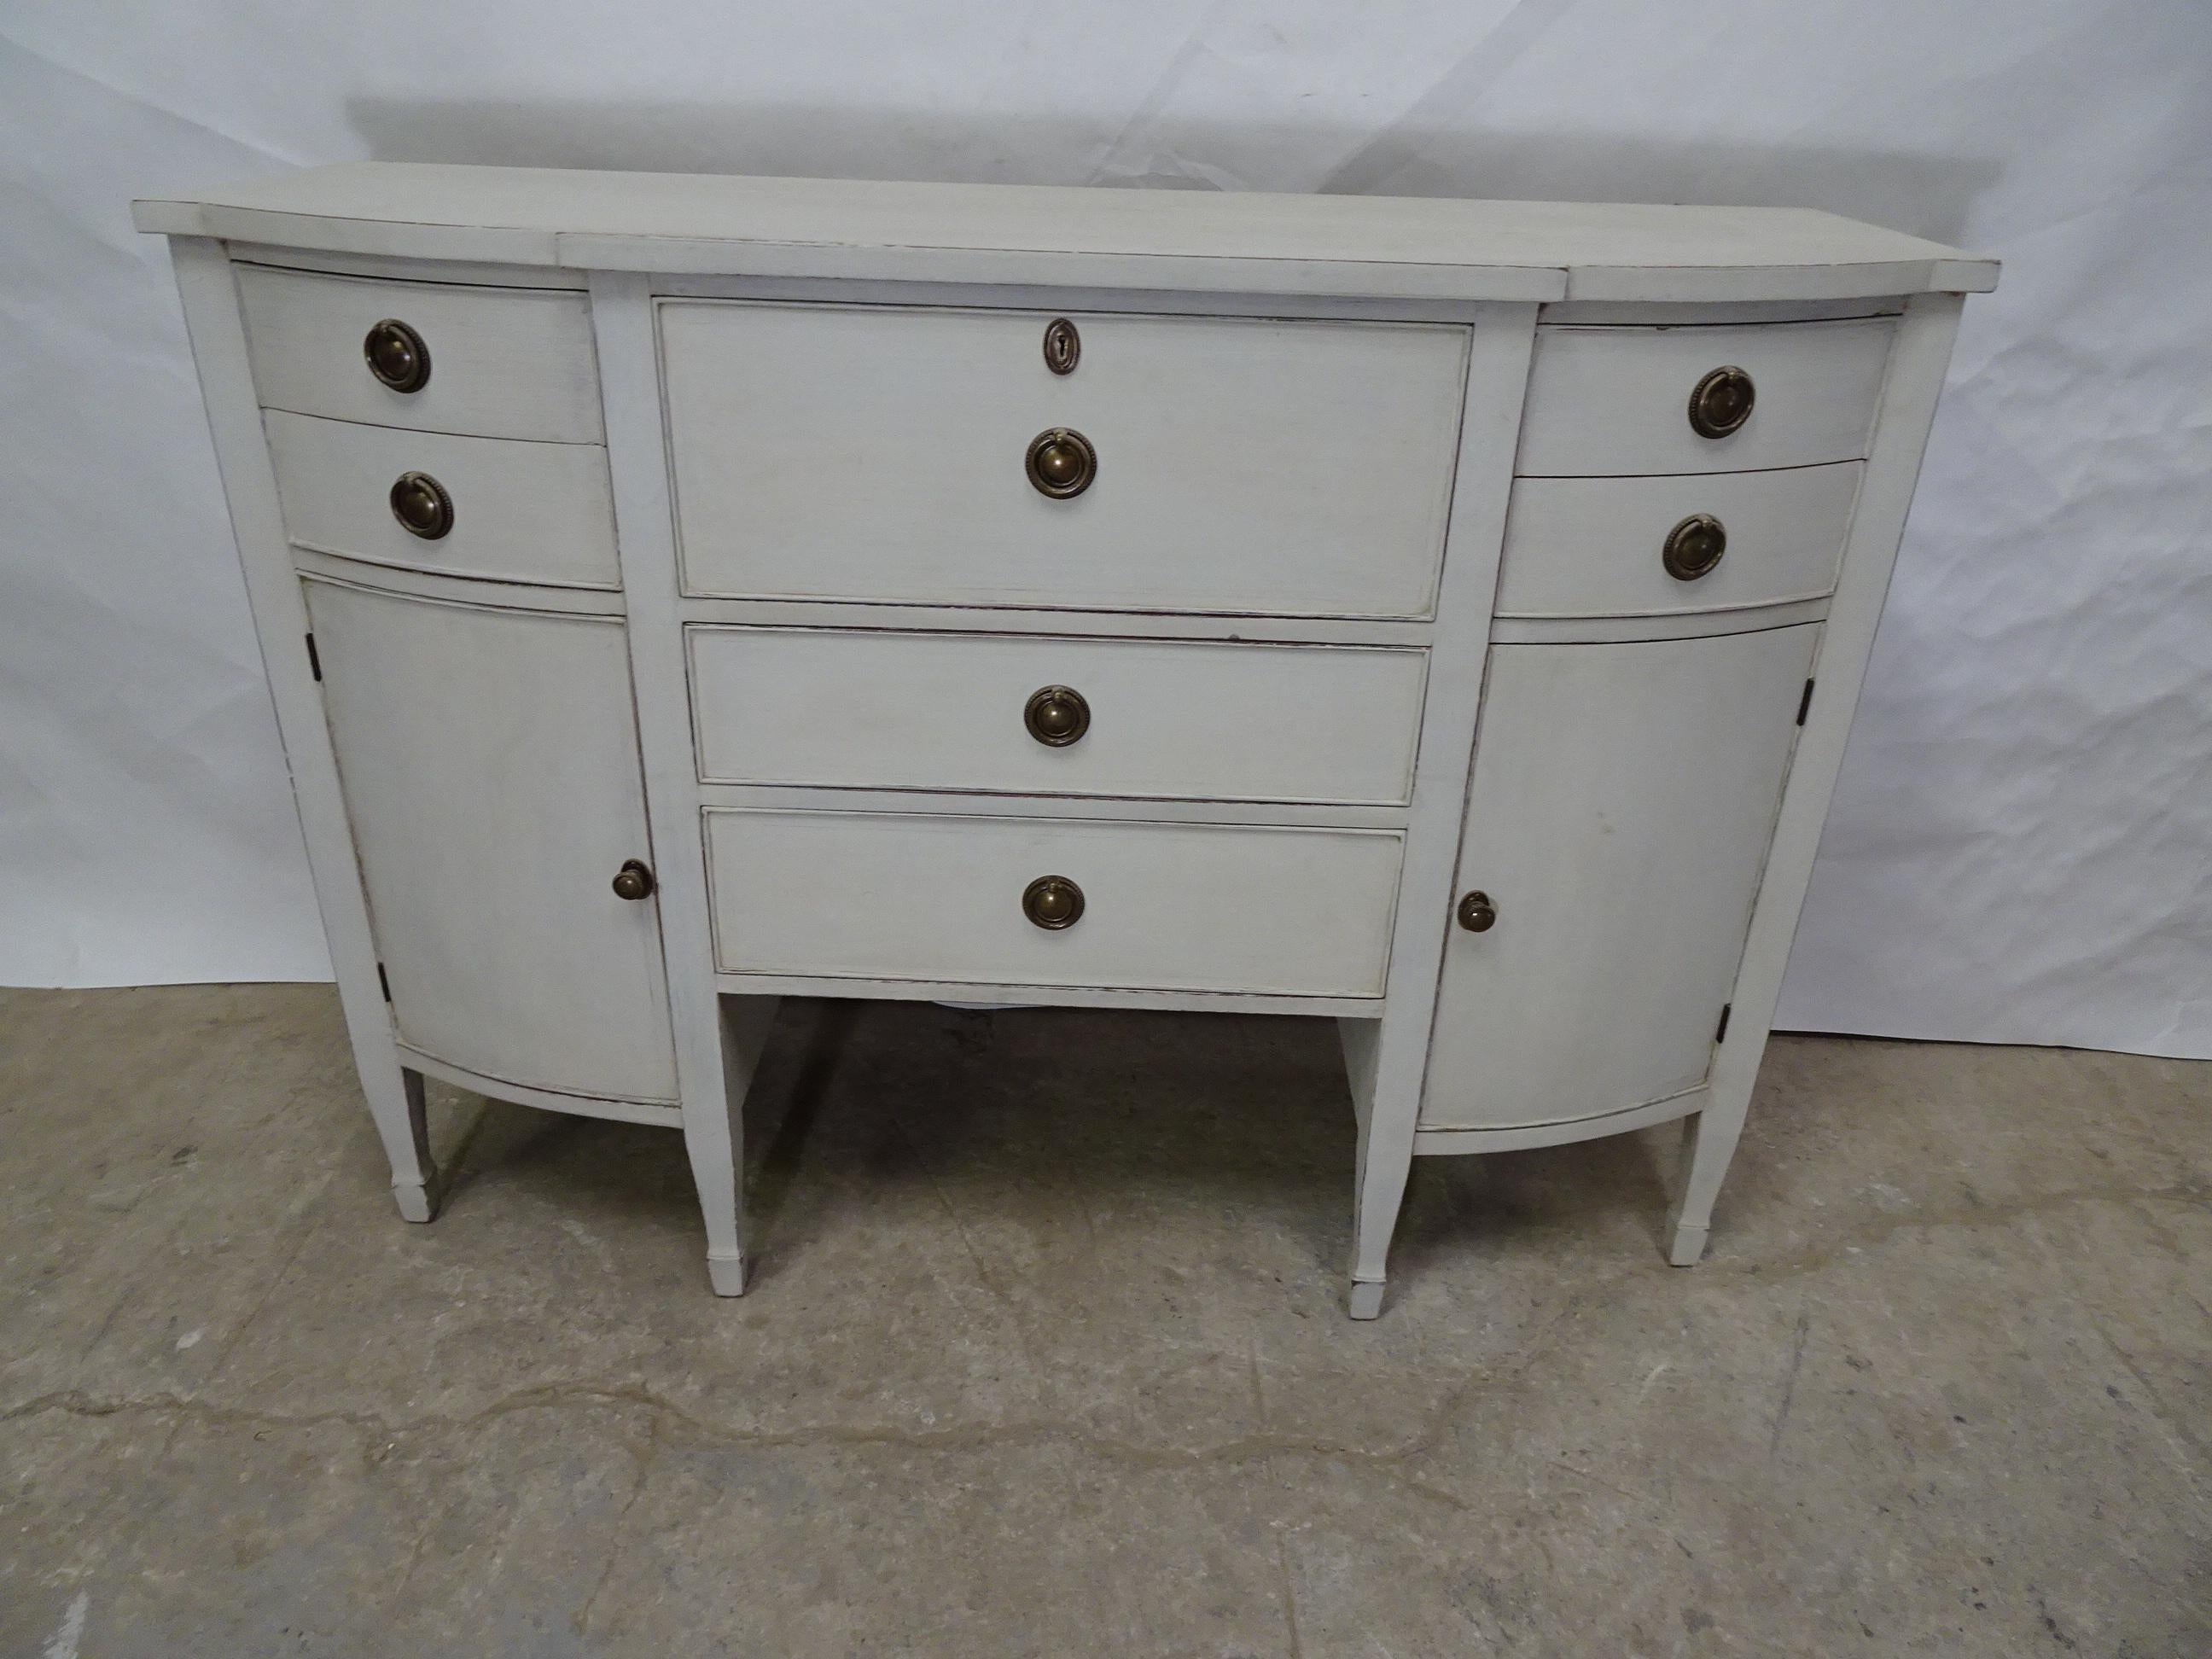 This is a Gustavian style sideboard, it’s been restored and repainted with milk paints 